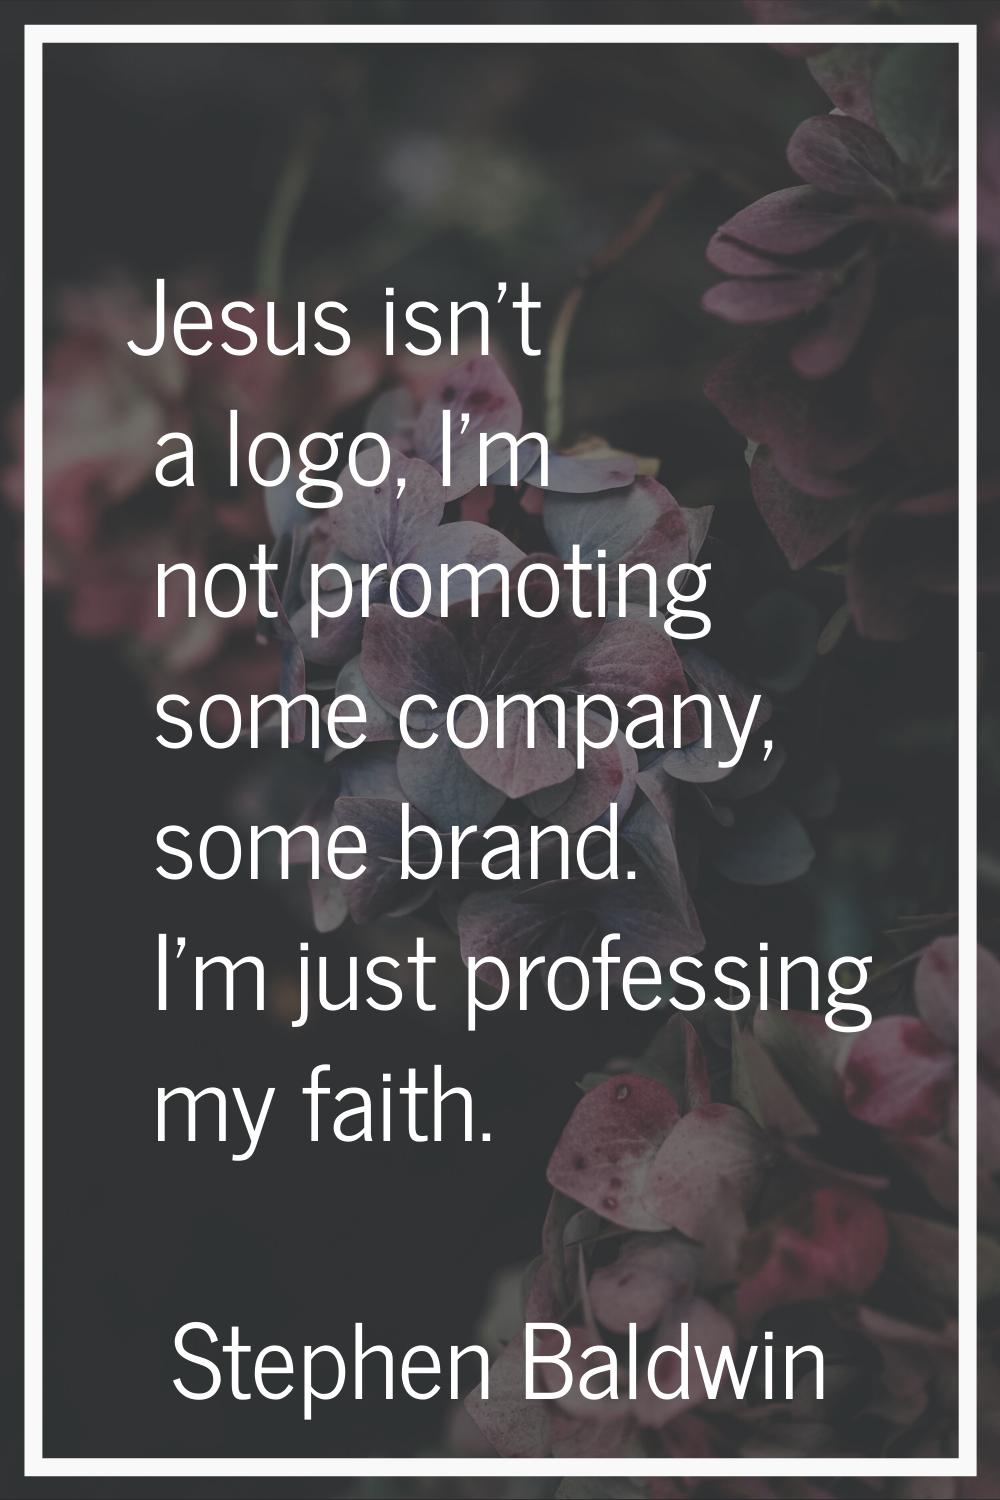 Jesus isn't a logo, I'm not promoting some company, some brand. I'm just professing my faith.